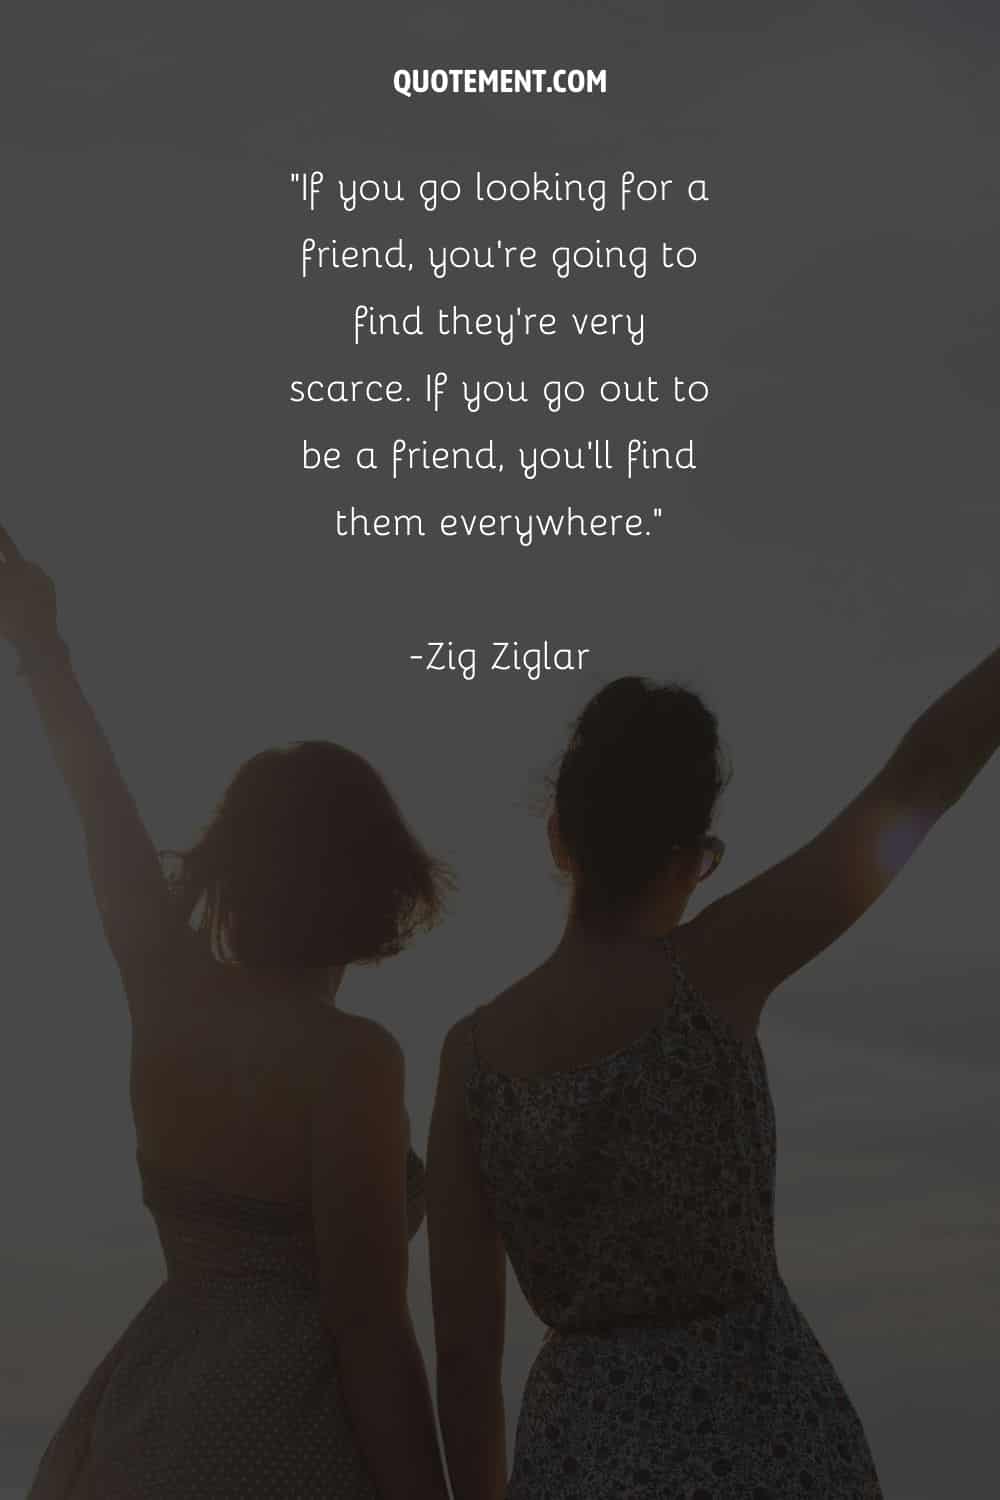 Two friends standing together representing a quote about friends
